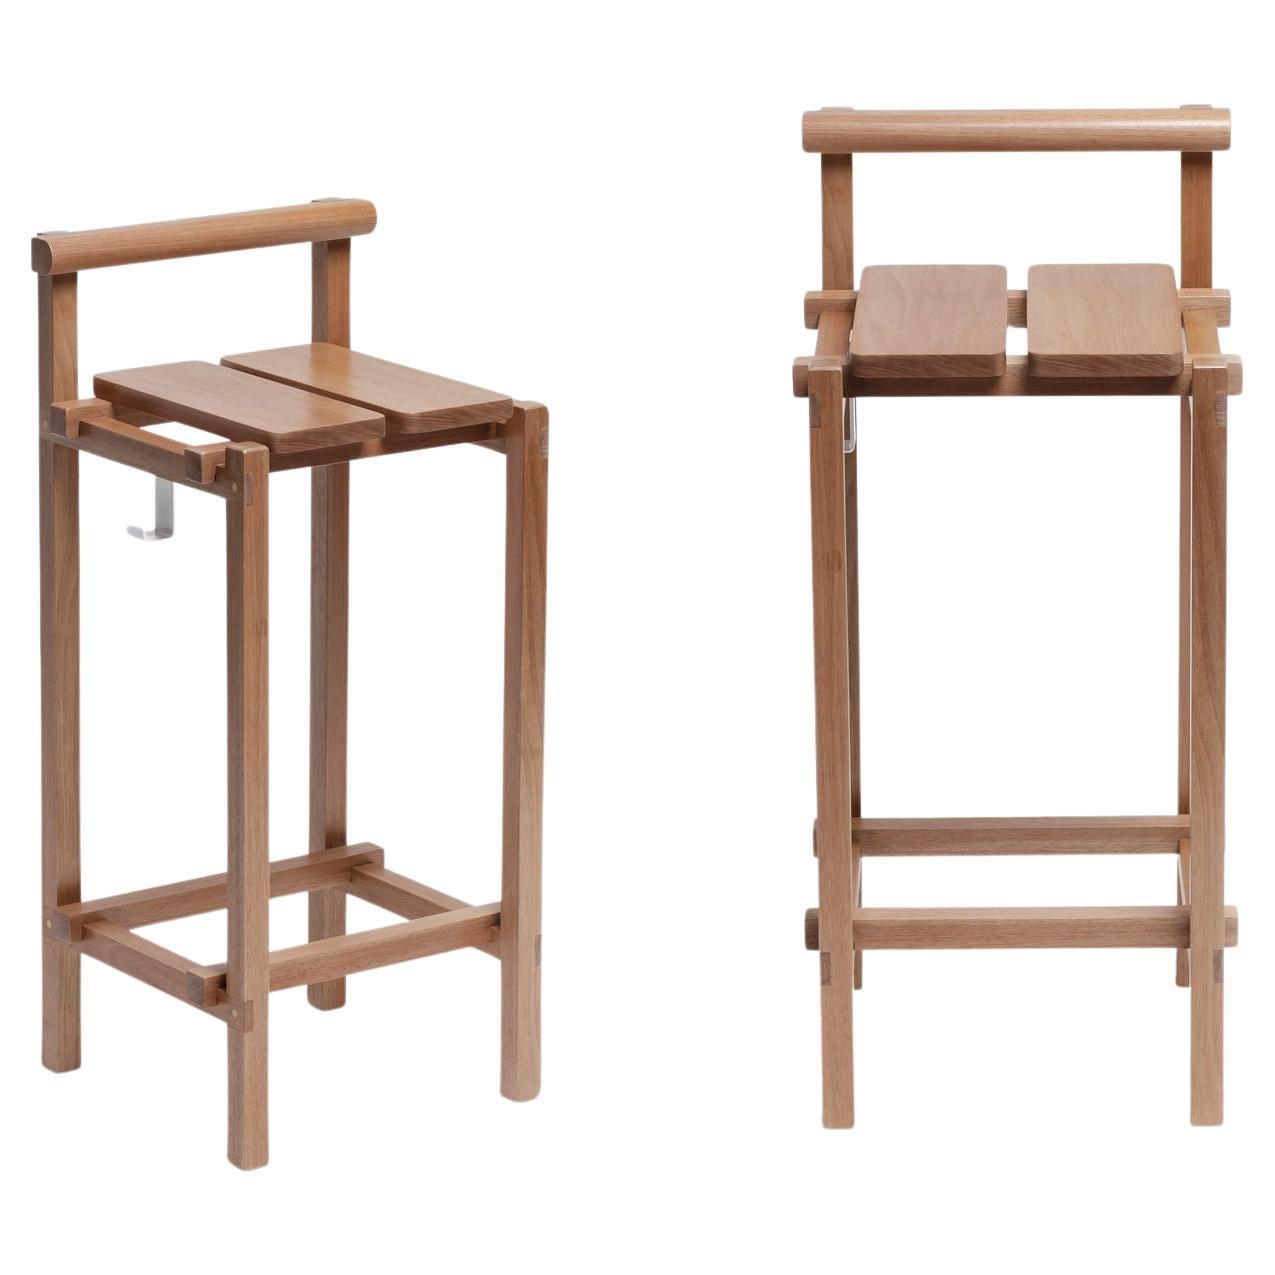 Set of 2 M Stools, Contemporary Handcrafted Stools in Hardwood For Sale